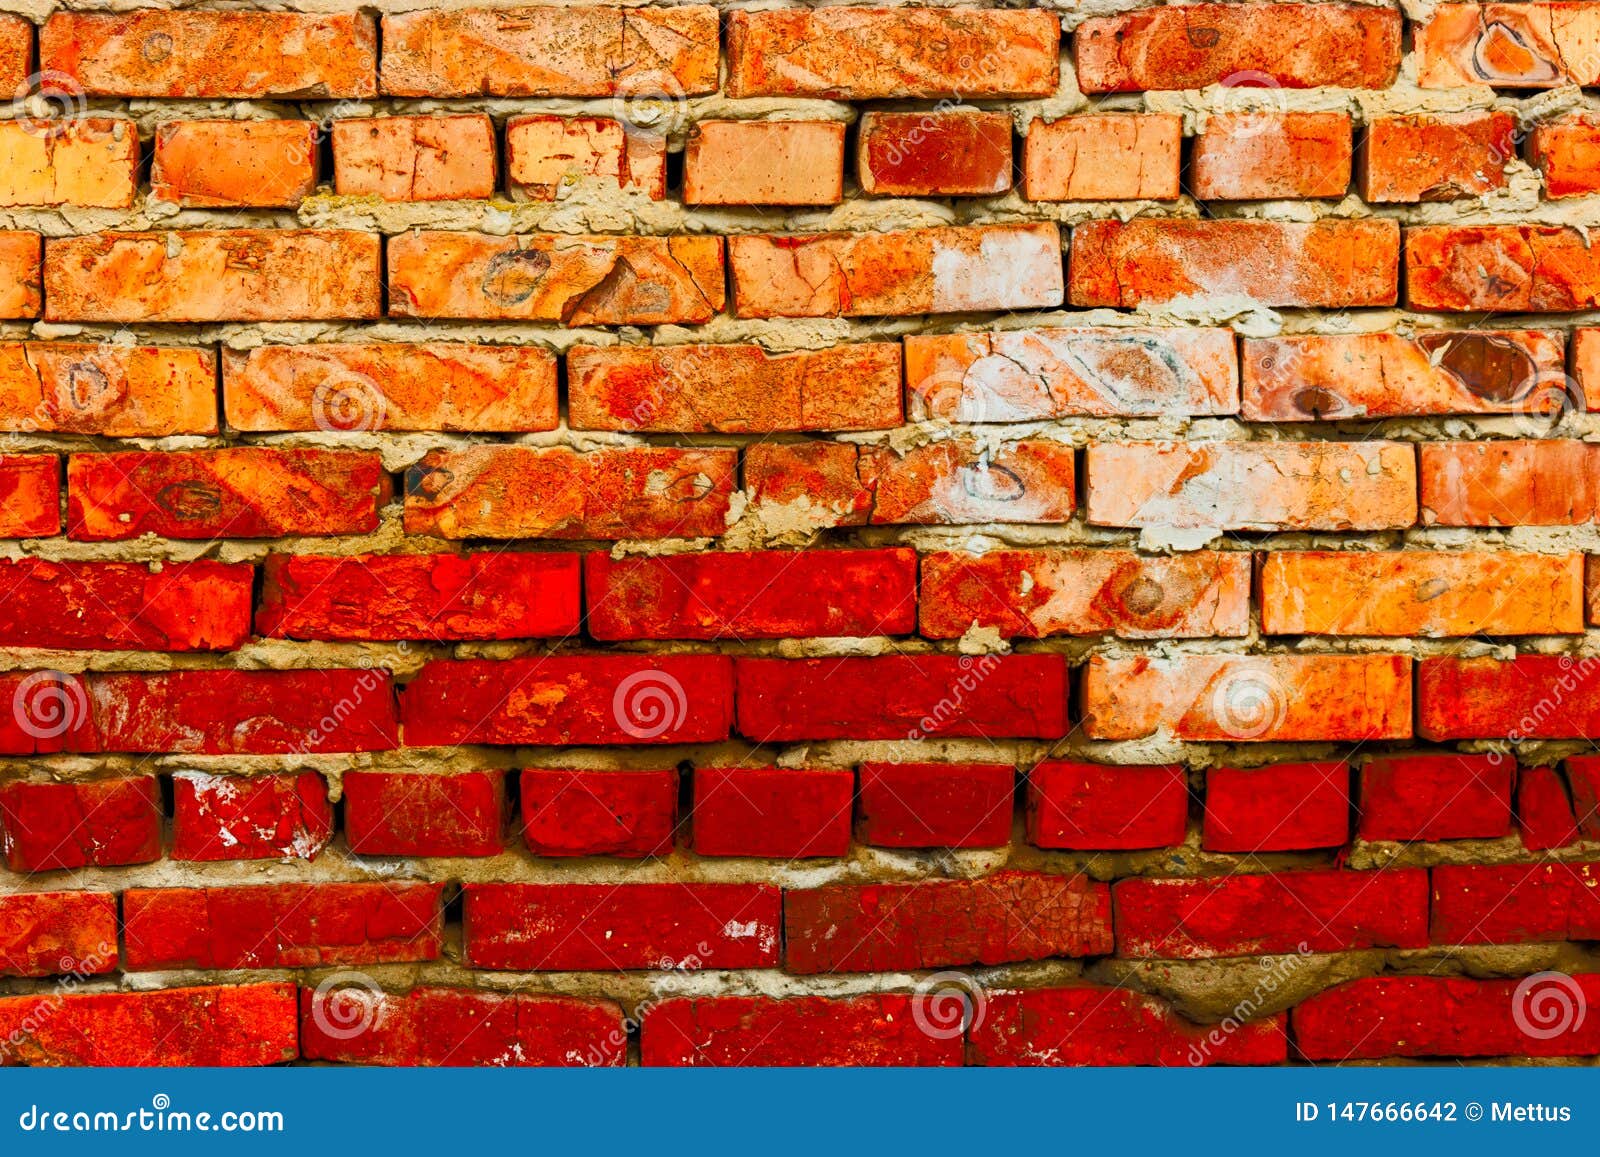 Red Brick Background Half Deep Red Stock Photo - Image of fence, building:  147666642